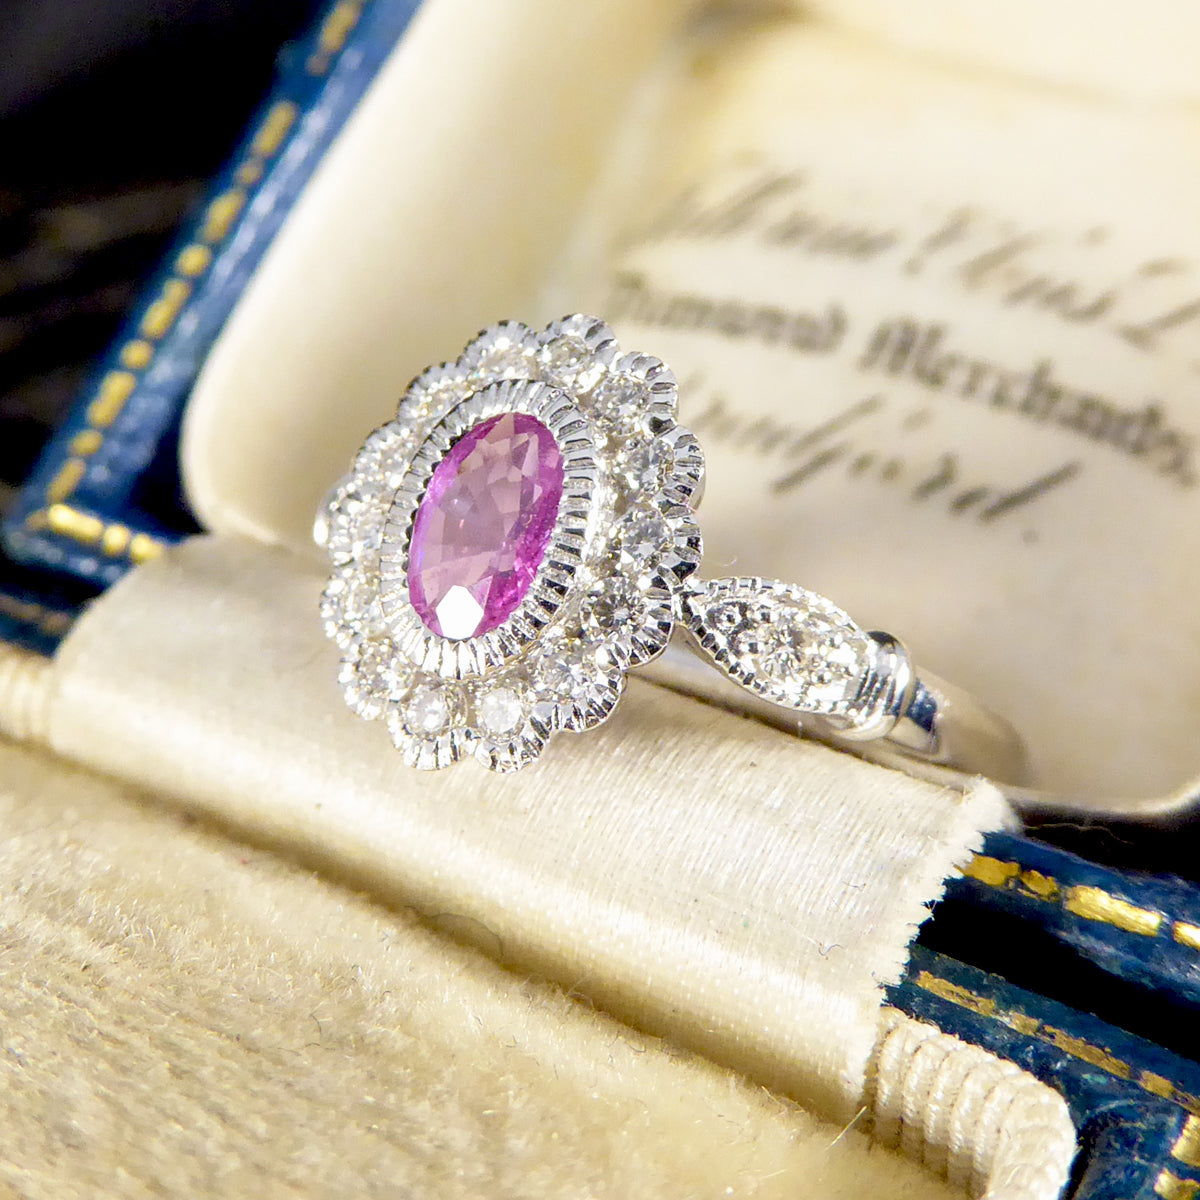 New Pink Sapphire and Diamond Cluster Ring Mounted in Platinum